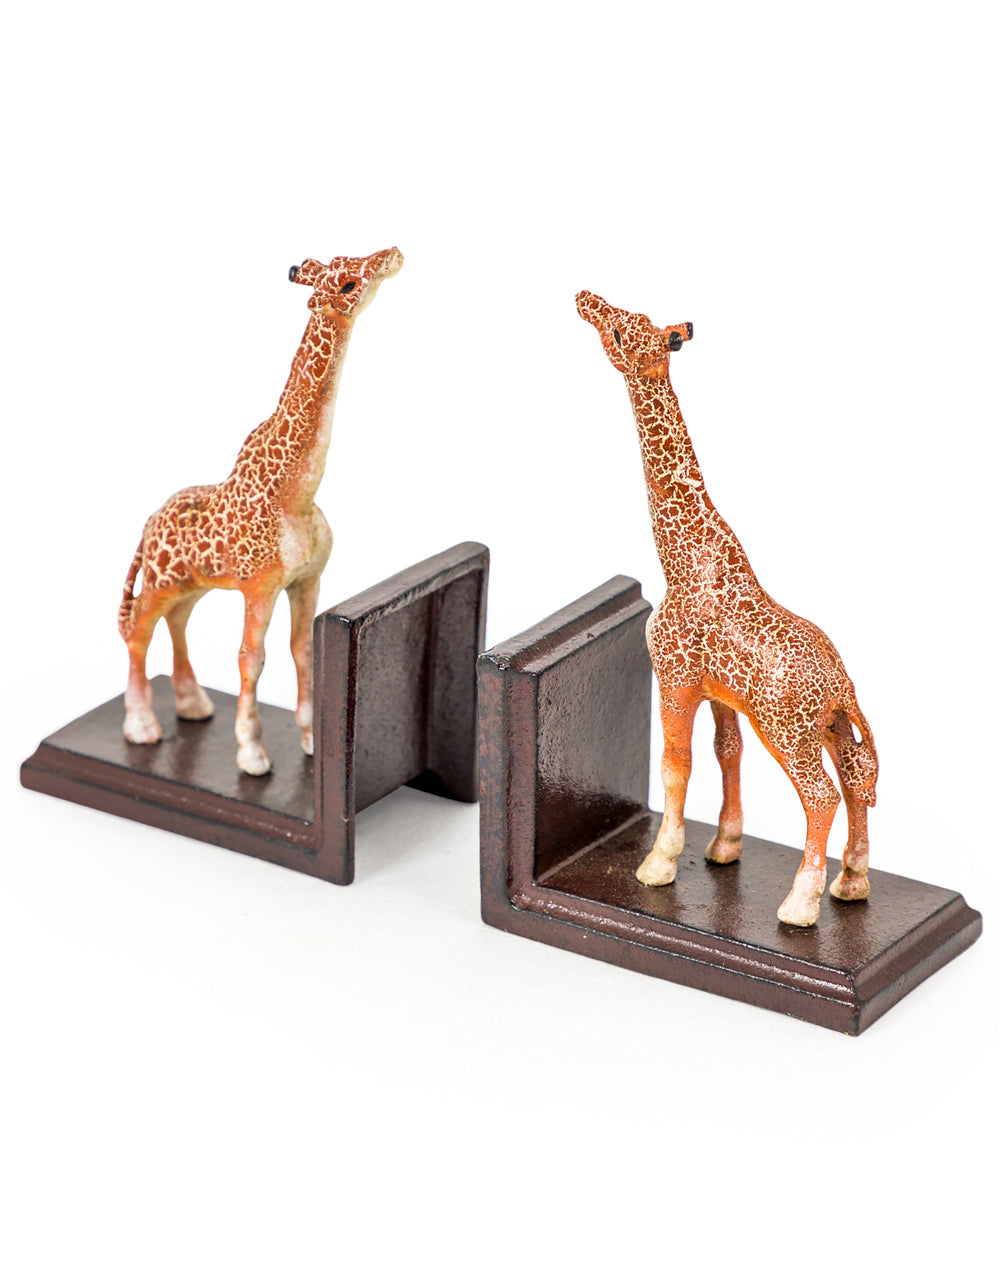 Cast Iron Antiqued Pair of Giraffe Bookends